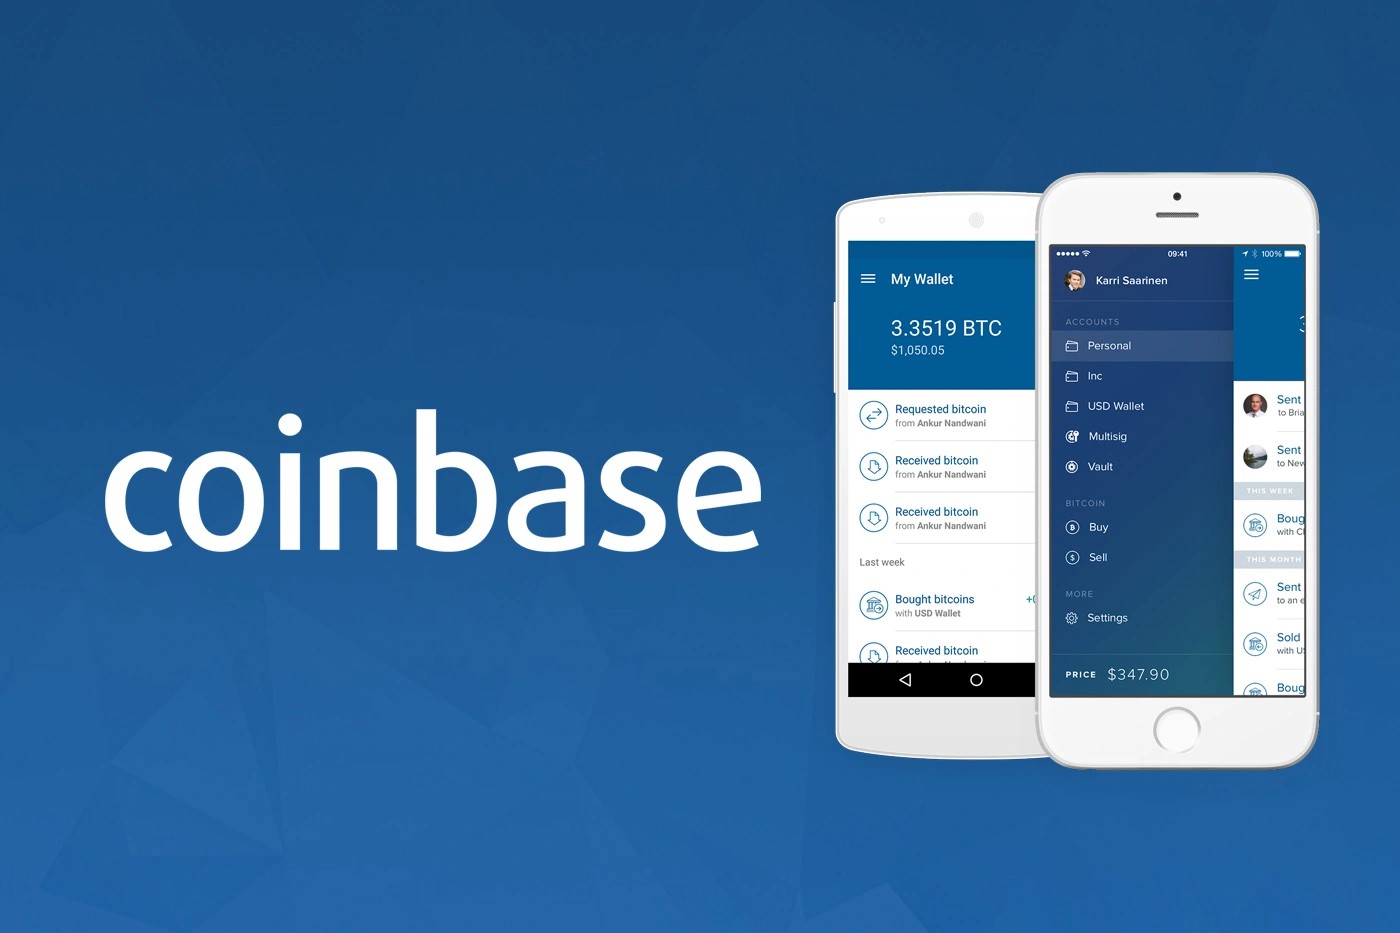 Coinbase app showing its interface